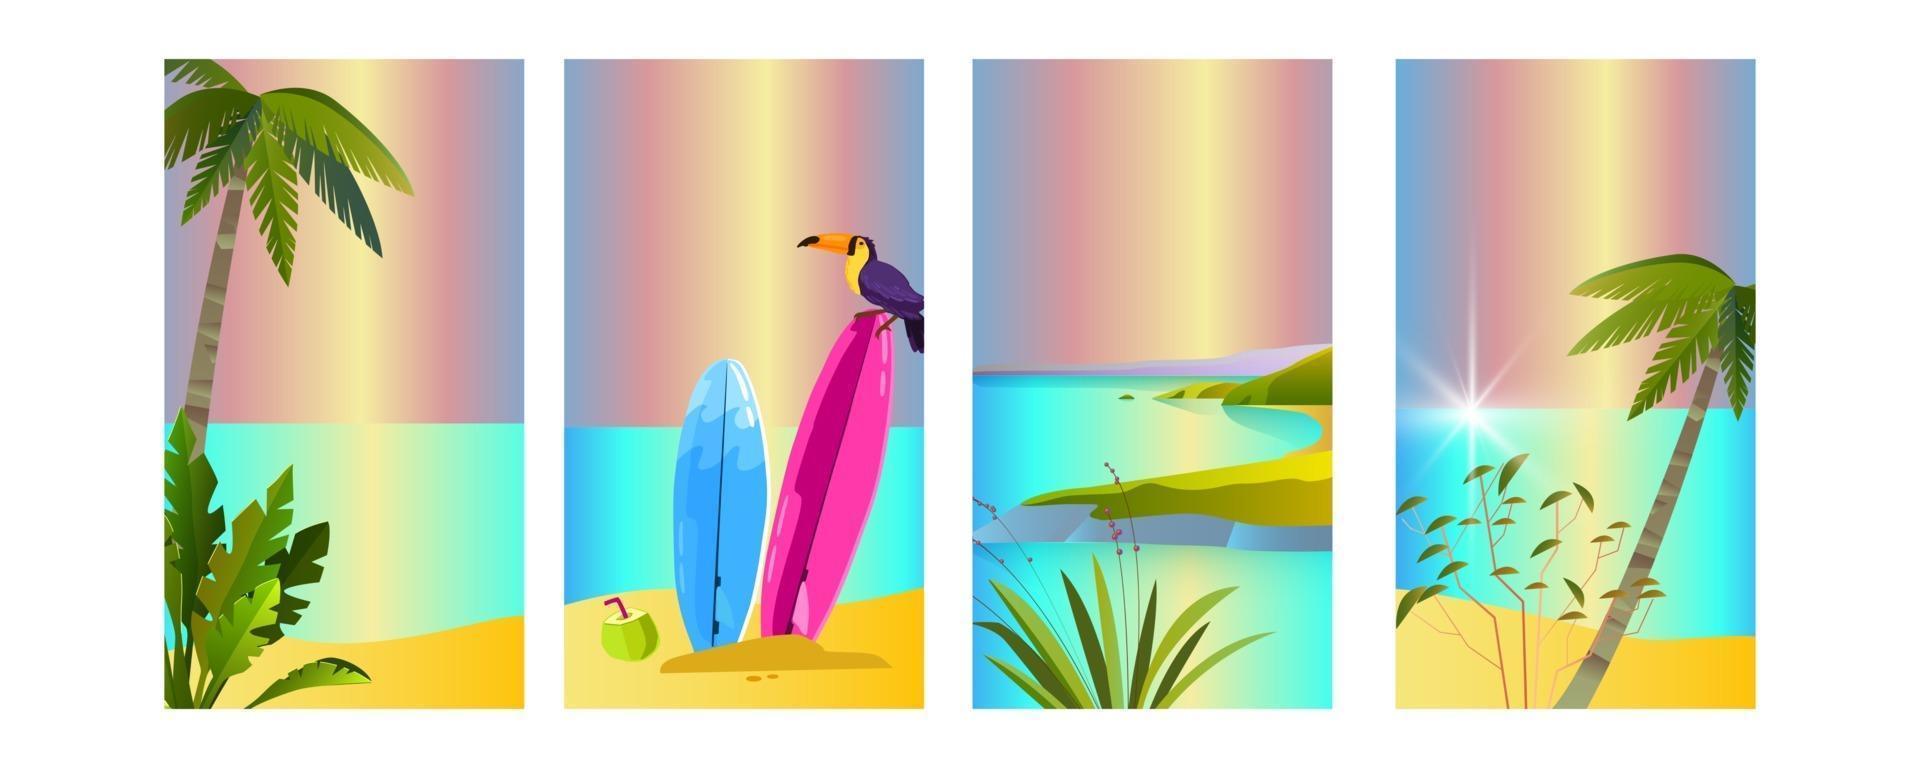 Summer backgrounds set, toucan, surfboard, palms, beach, island, ocean. Tropical vacation posters vector